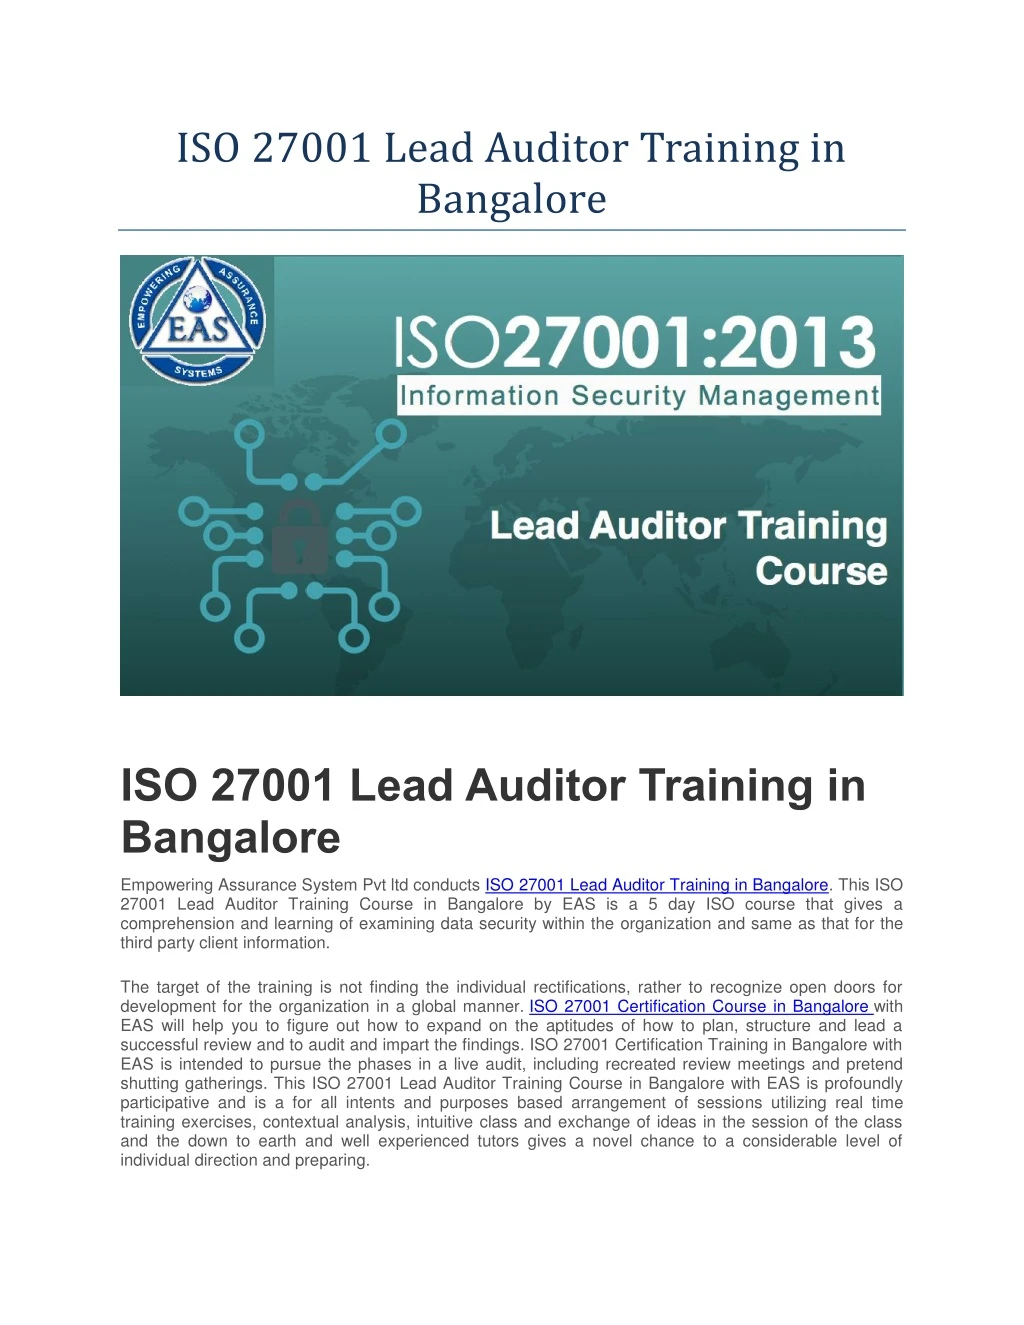 iso 27001 lead auditor training in bangalore